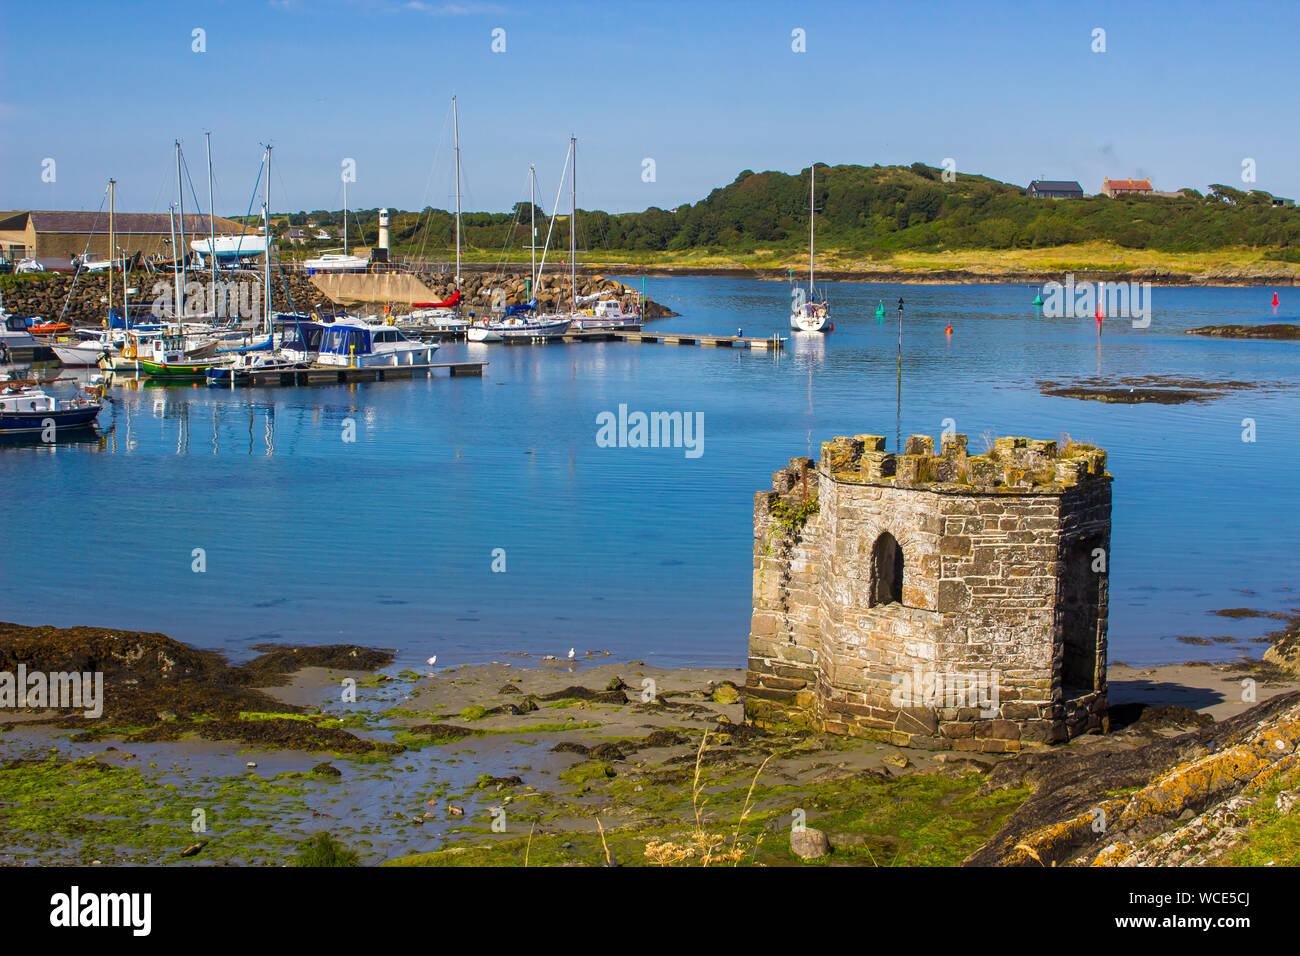 8 August 2019 A small medieval stone tower overlooking the marina and harbour at Ardglass County Down northern Ireland on a hot day in summer Stock Photo